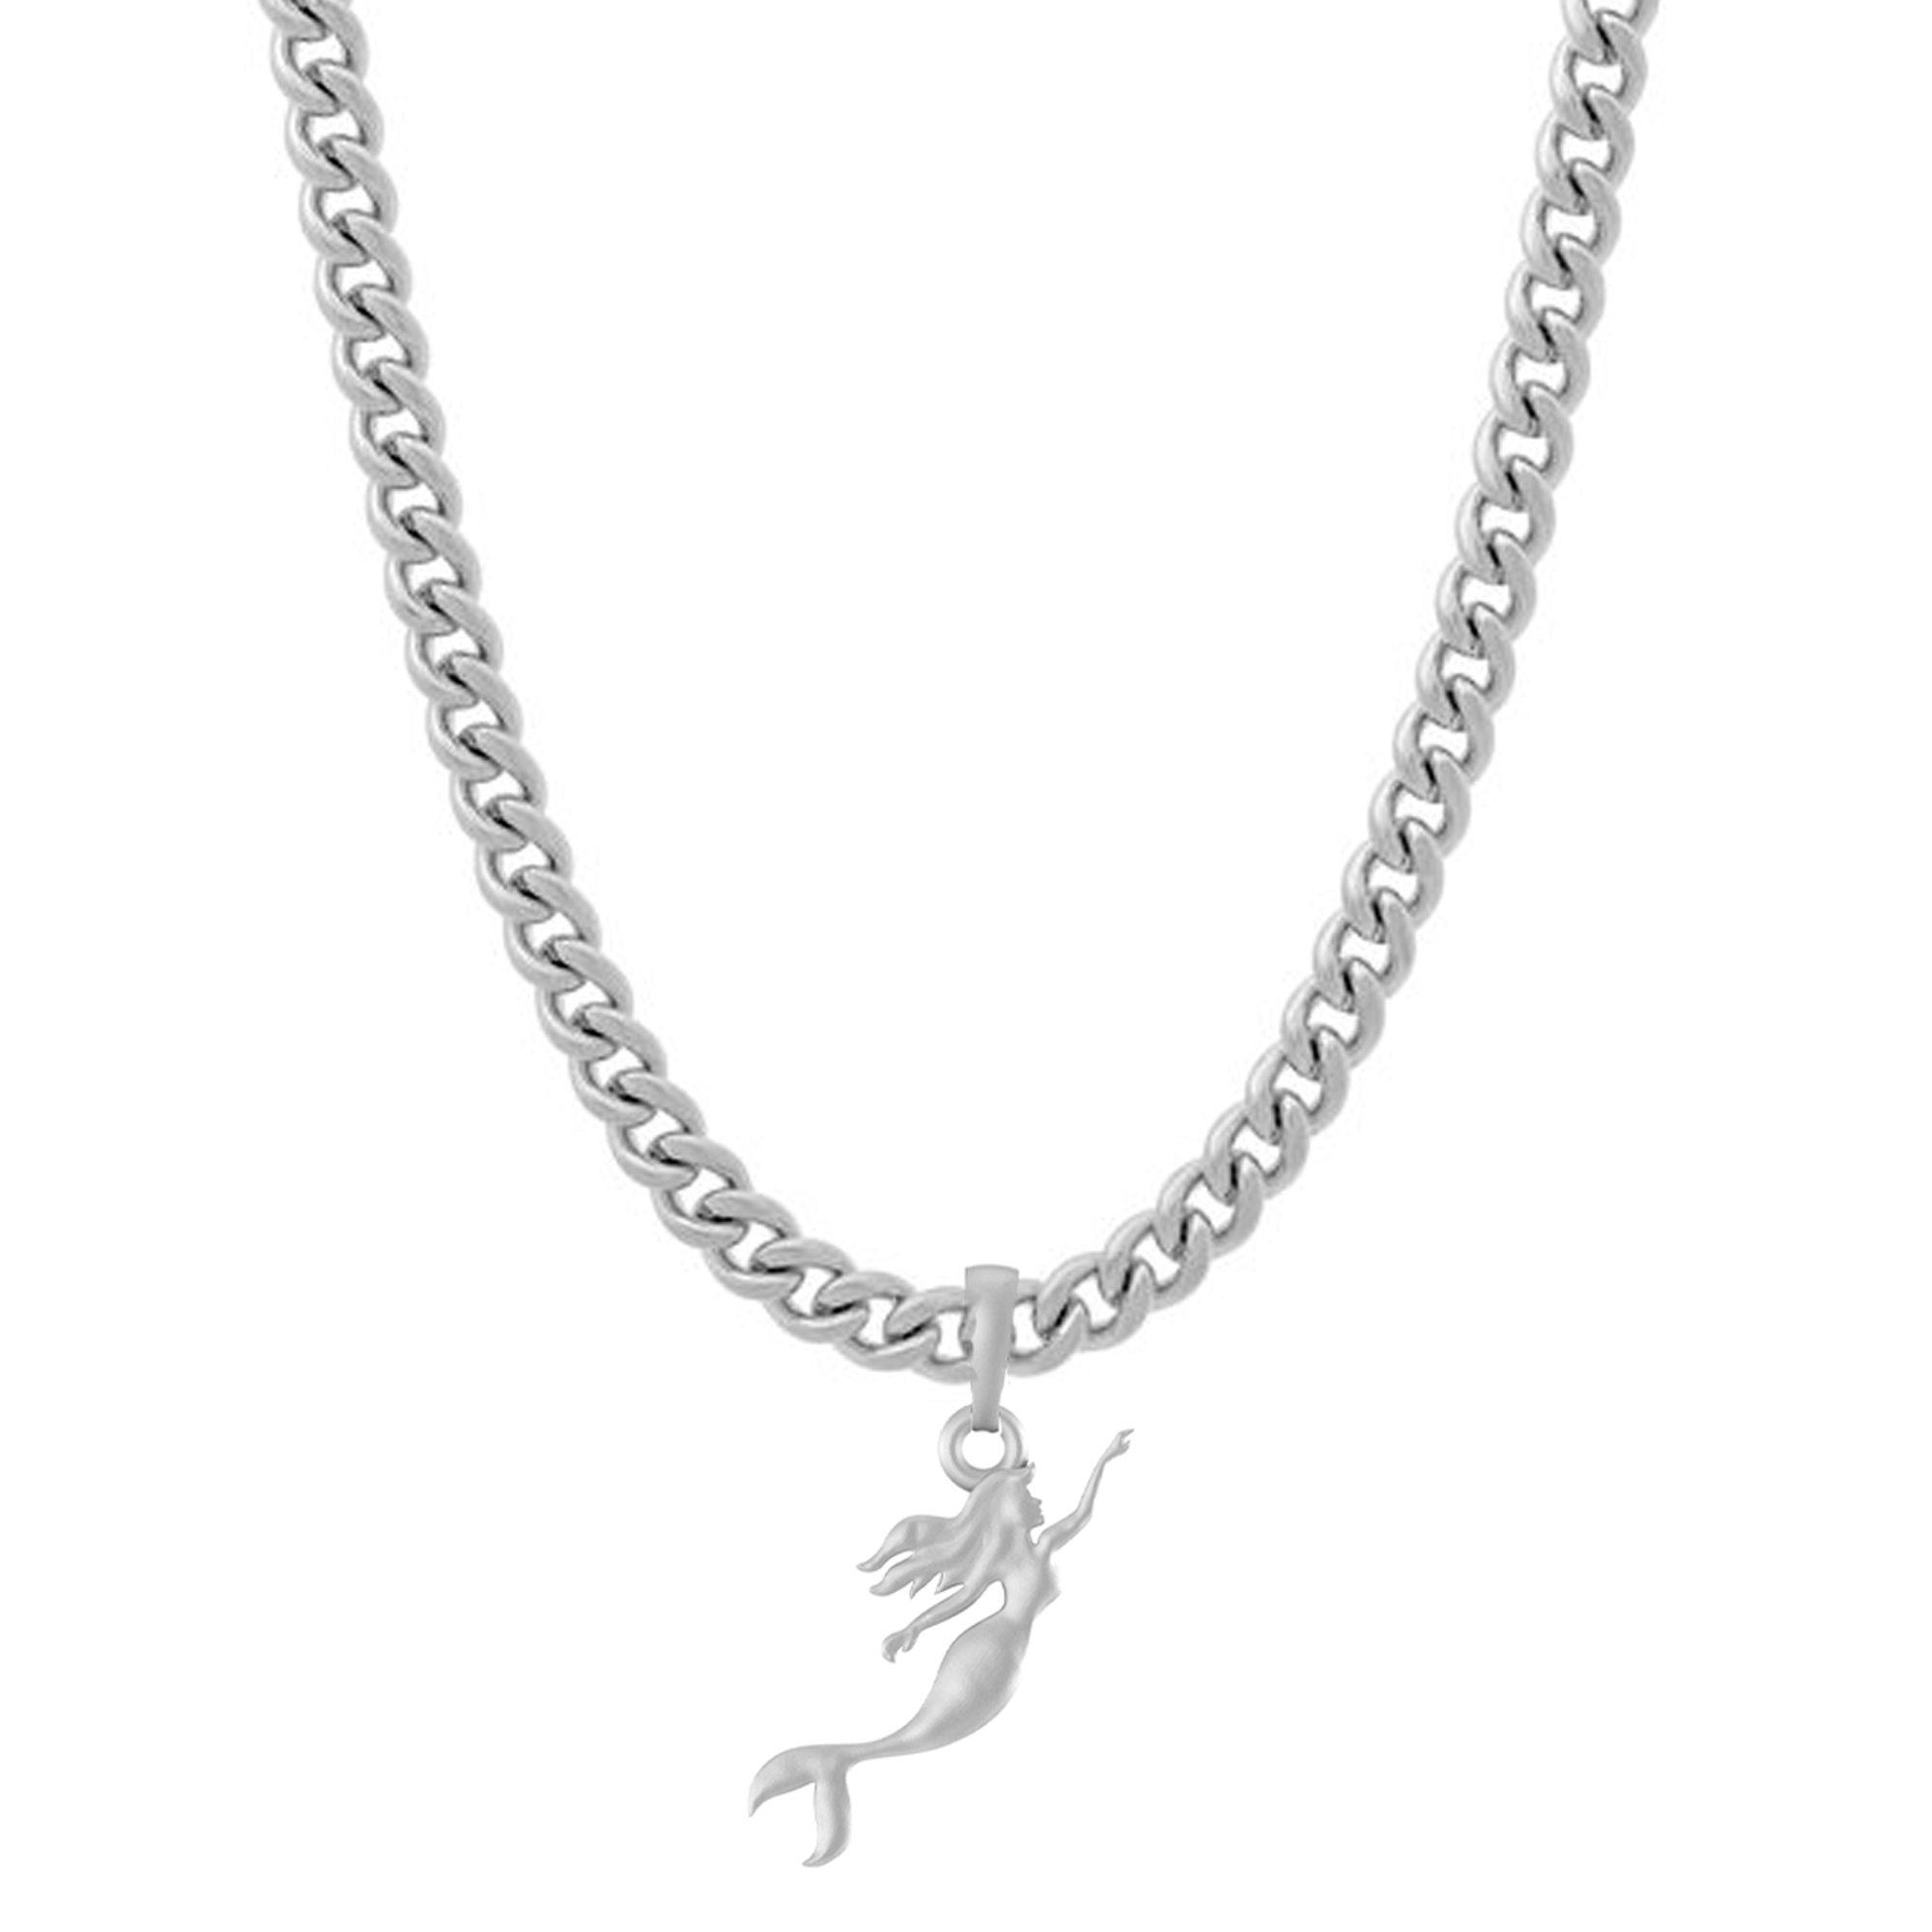 Akshat Sapphire Sterling Silver (92.5% purity) ambitious and Stylish divine Mermaid Chain Pendant  (Pendant with Curb Chain-22 inches) for Men & Women Pure Silver Fashionable and gorgeous Mermaid Chain Locket for Happiness and joy